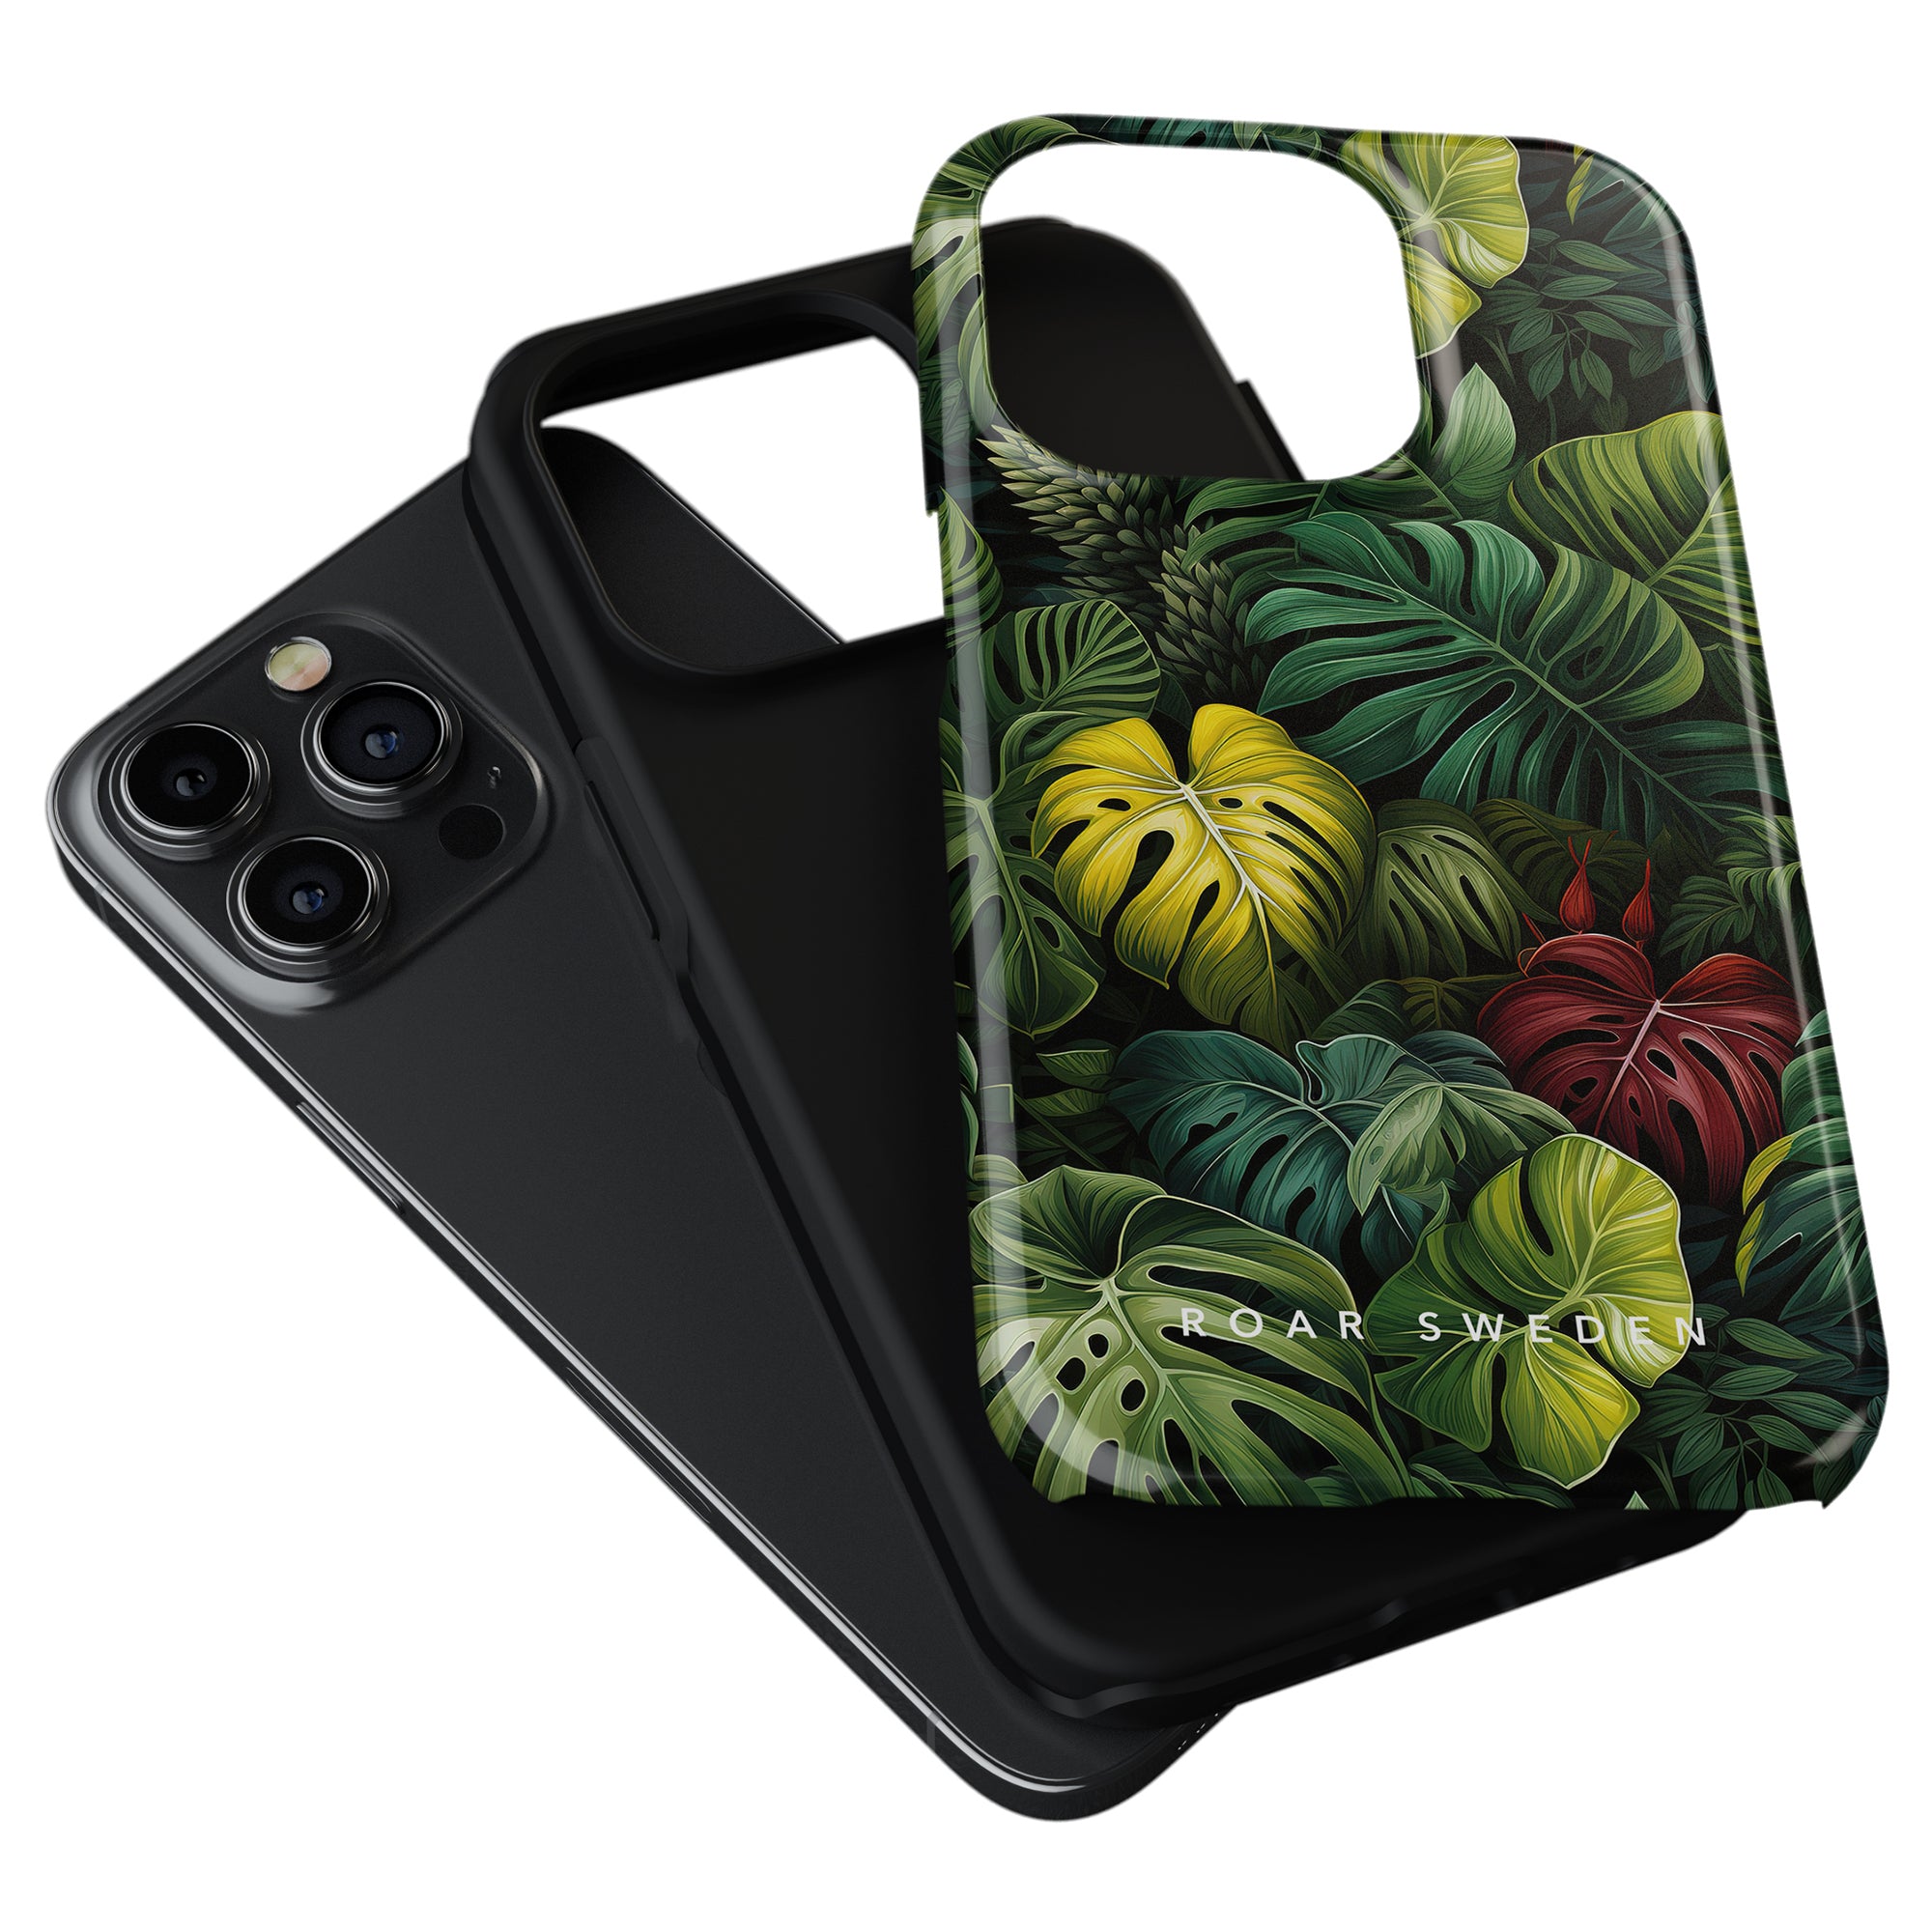 A smartphone with three rear cameras and a tropical-themed phone case from the Jungle Collection, featuring vibrant green, yellow, and red Monstera Deliciosa leaves, is displayed. The Deliciosa - Tough Case is slightly slid off the phone to reveal its stunning design.